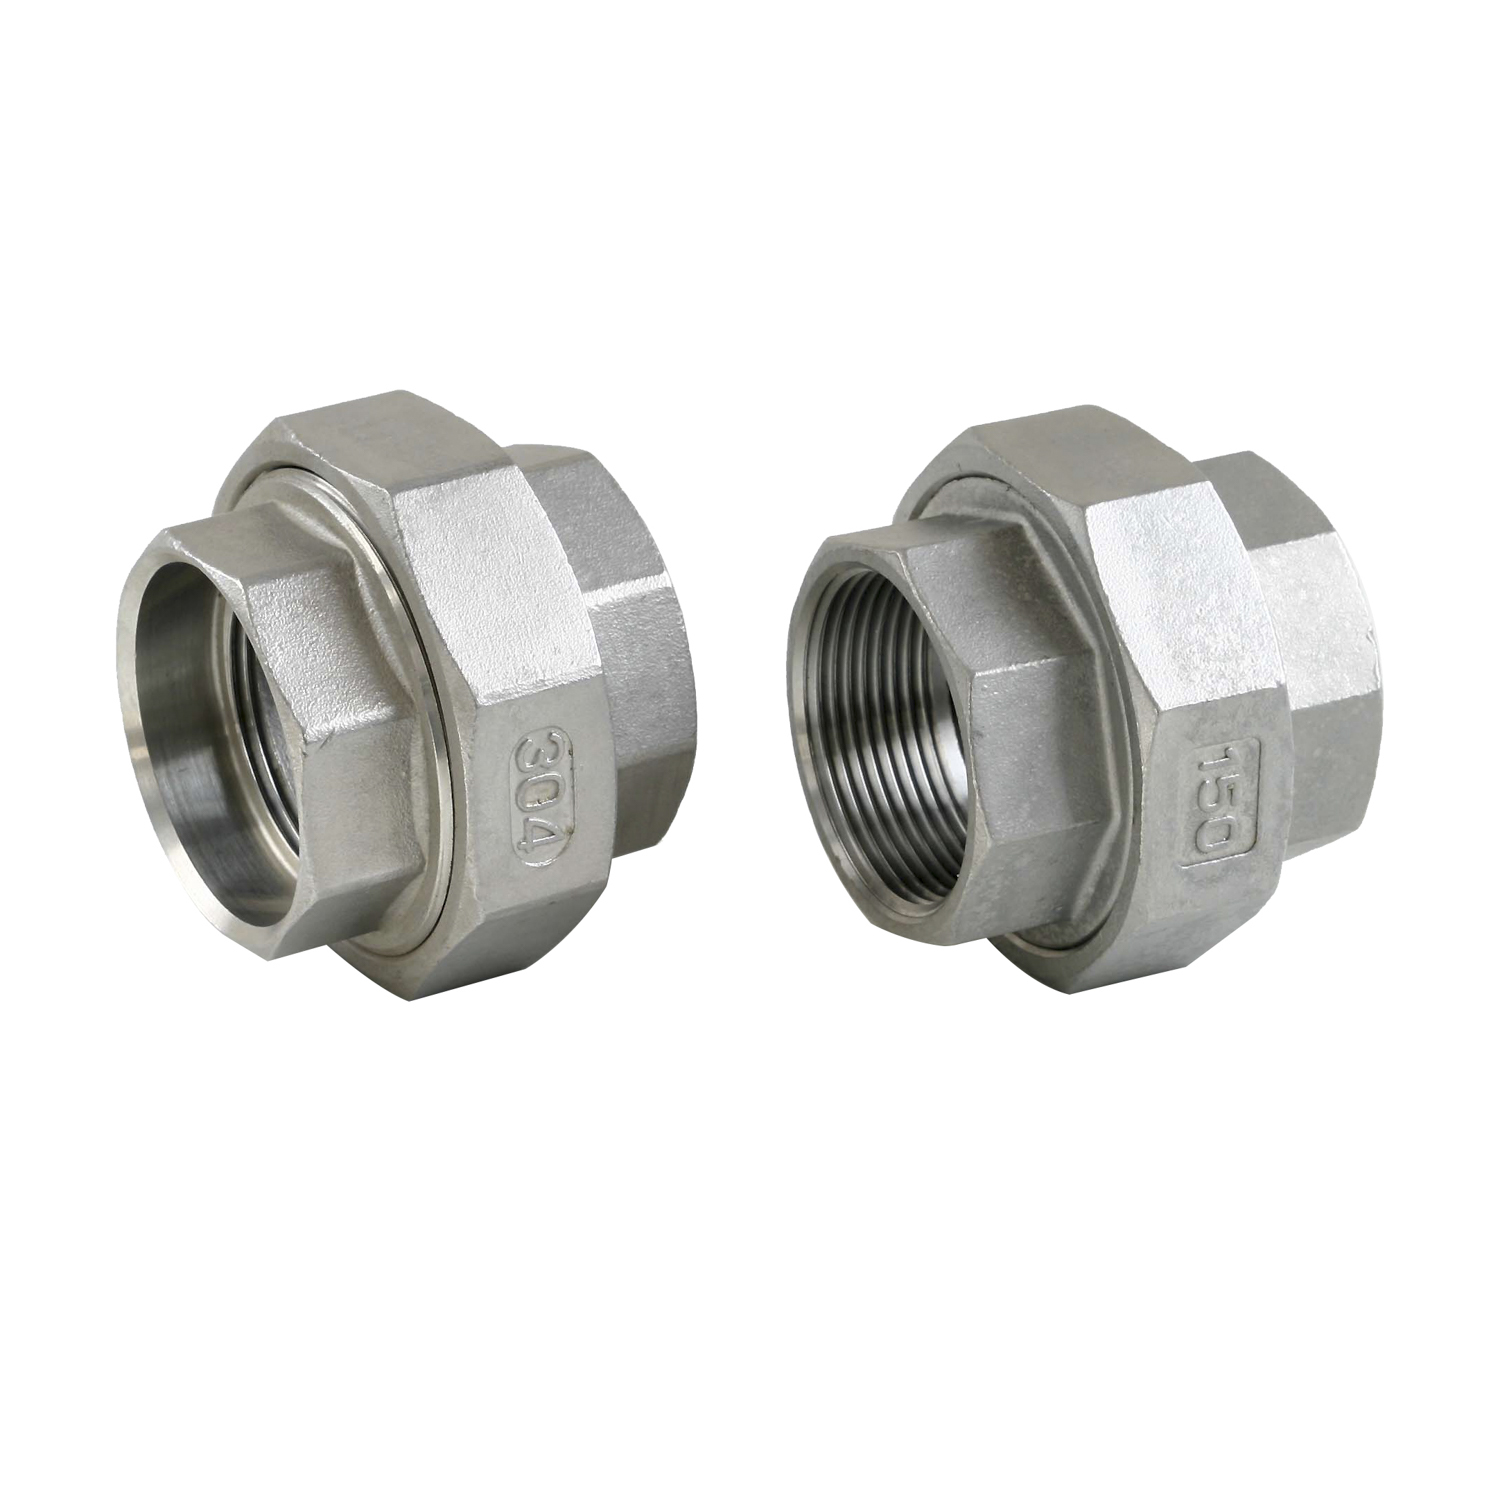 Stainless Steel Fittings Union F/F with BSP/NPT Thread